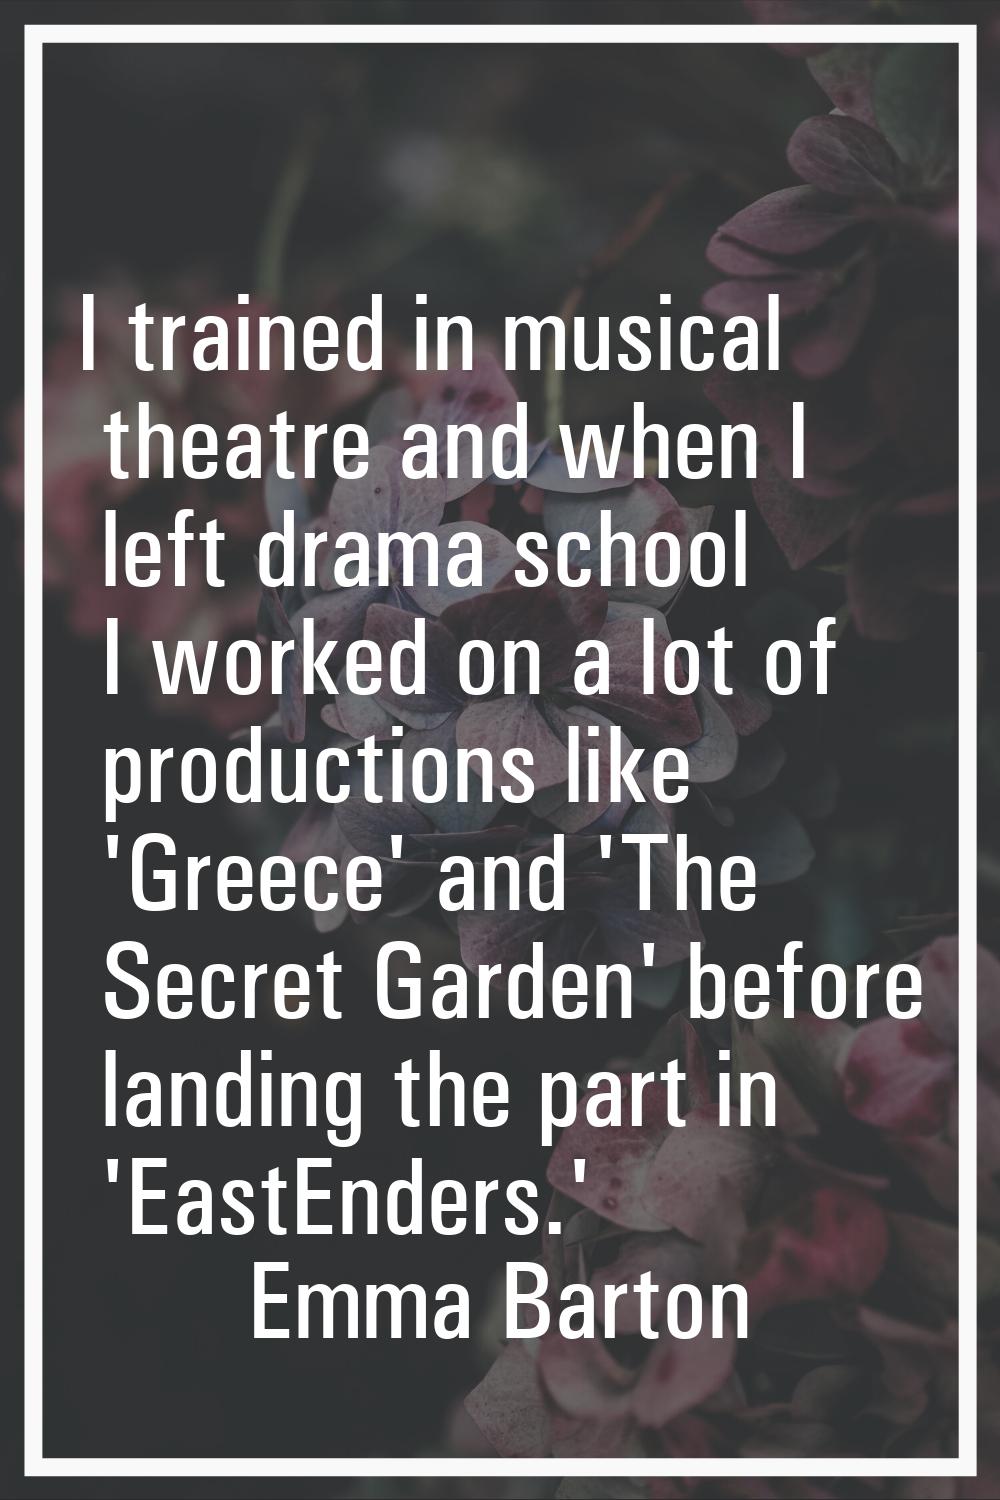 I trained in musical theatre and when I left drama school I worked on a lot of productions like 'Gr